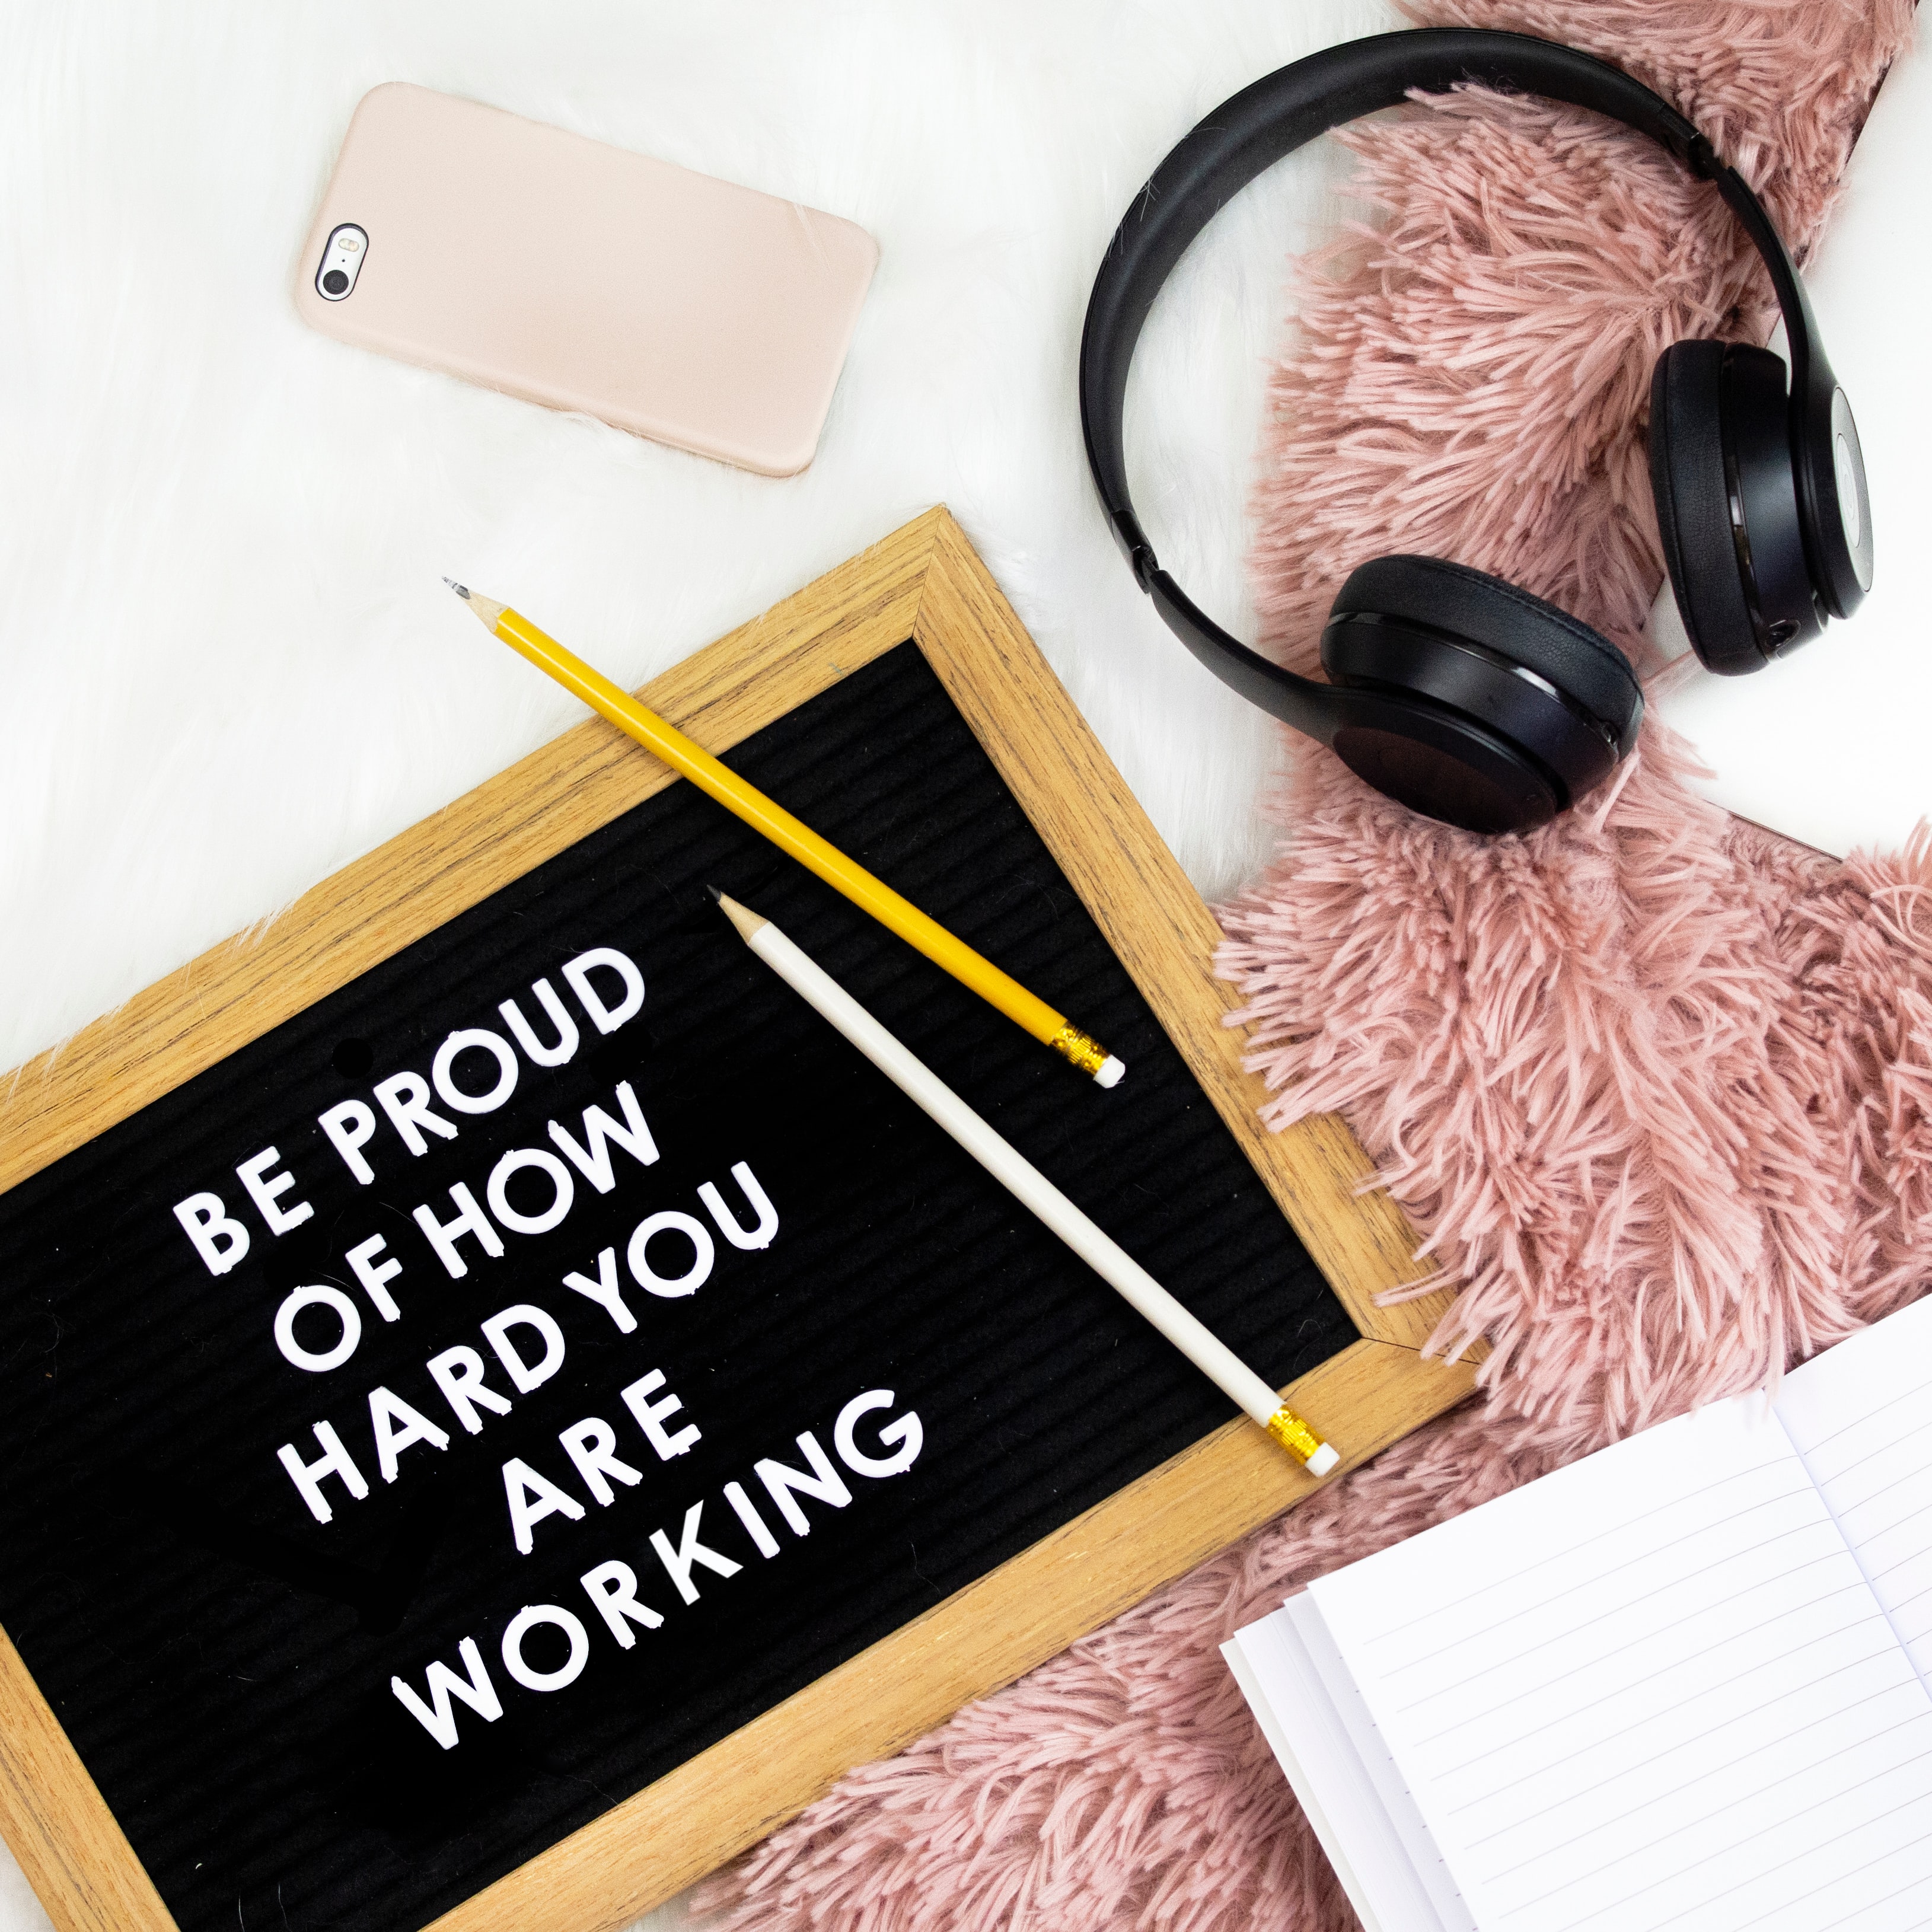 Be proud of how hard you are working sign with headphones and iPhone